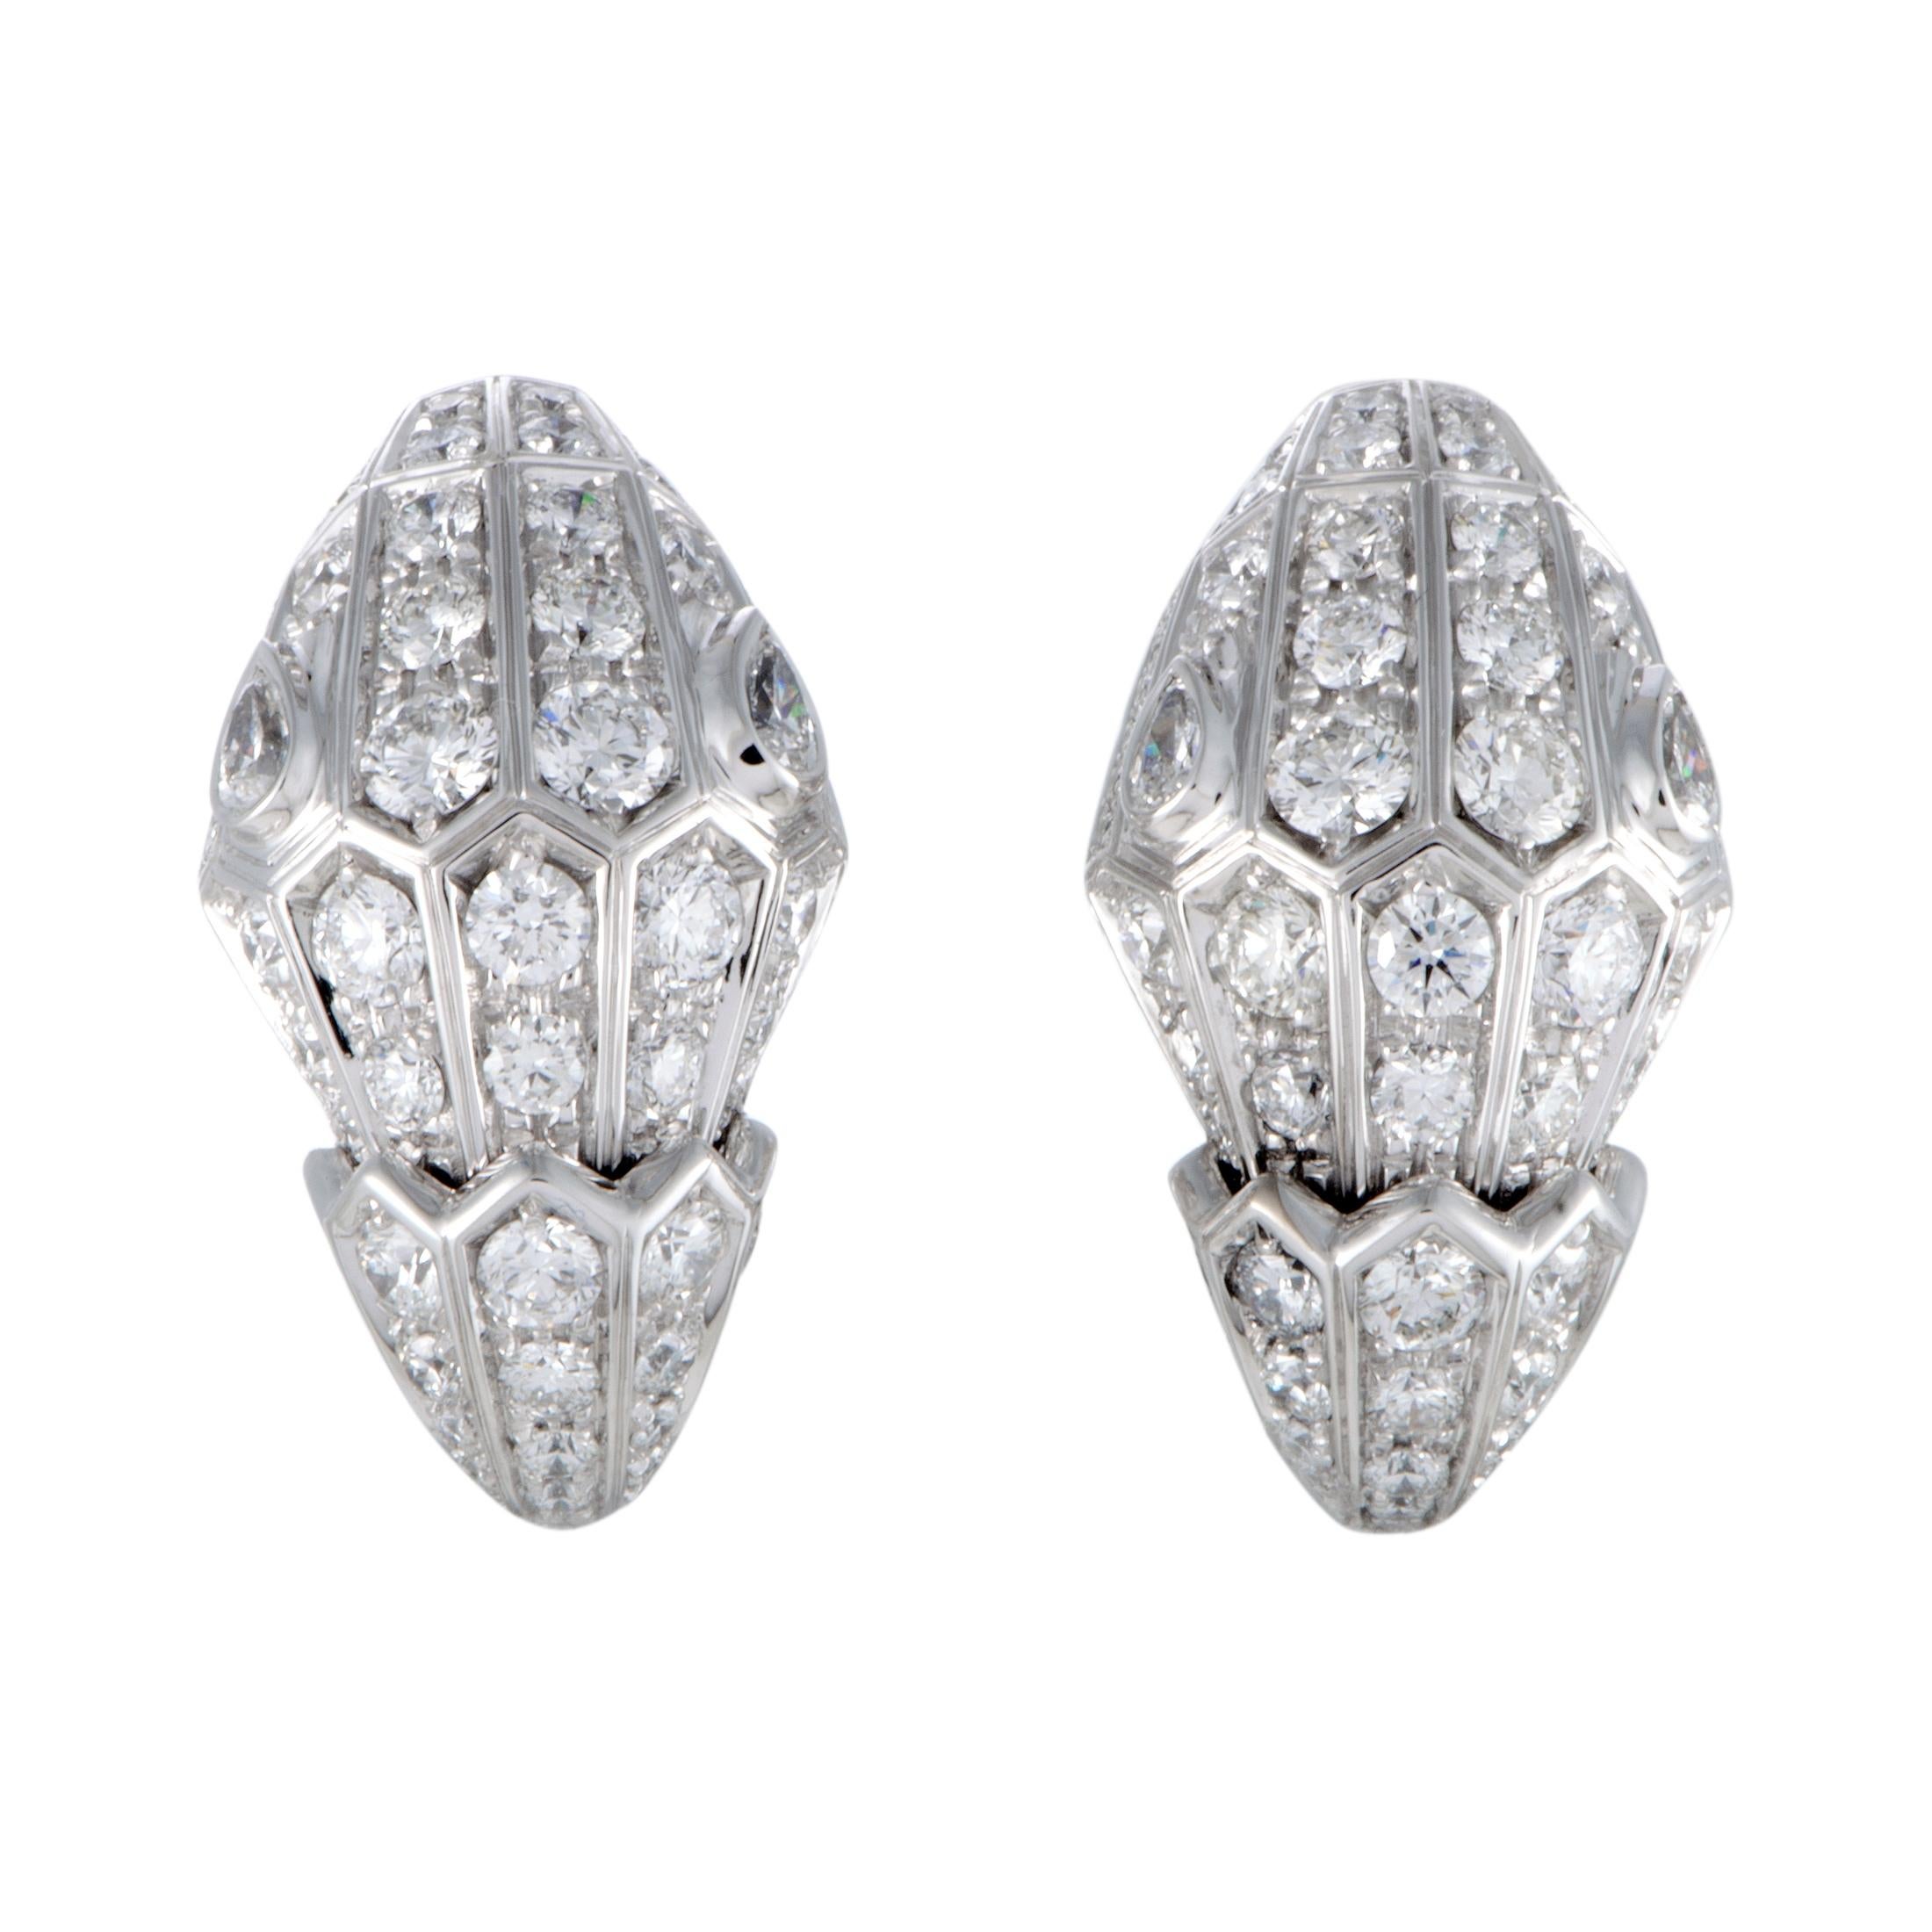 Opt for an accessory of immense aesthetic value with this fabulous pair of earrings that boasts an incredibly refined design that is opulently topped off with a plethora of luxuriously resplendent gems. The pair is presented by Bvlgari and it is